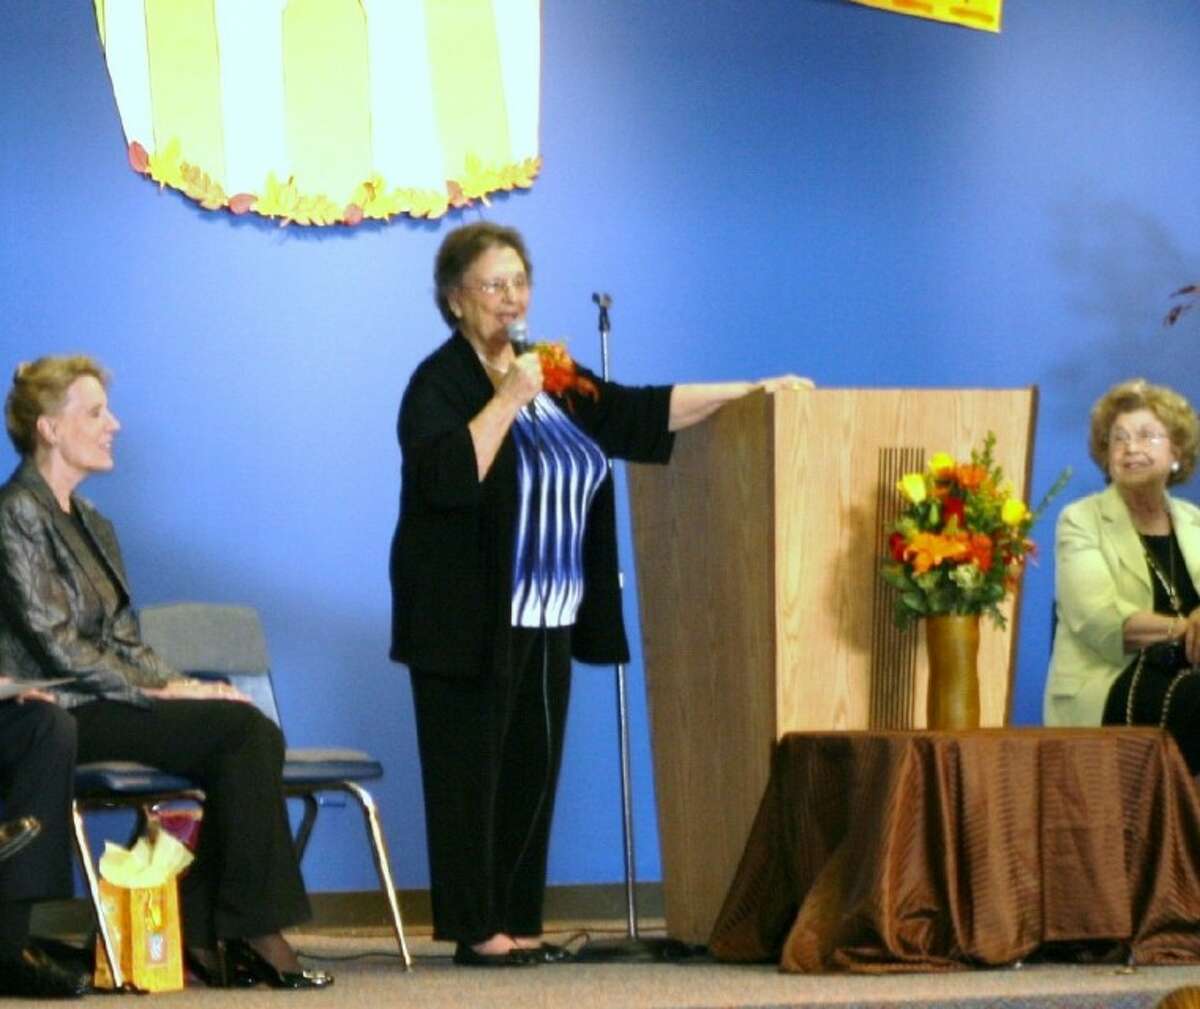 Imogene Giesinger speaks to students during a celebration of her 80th birthday at Giesinger Elementary, which is named after her.